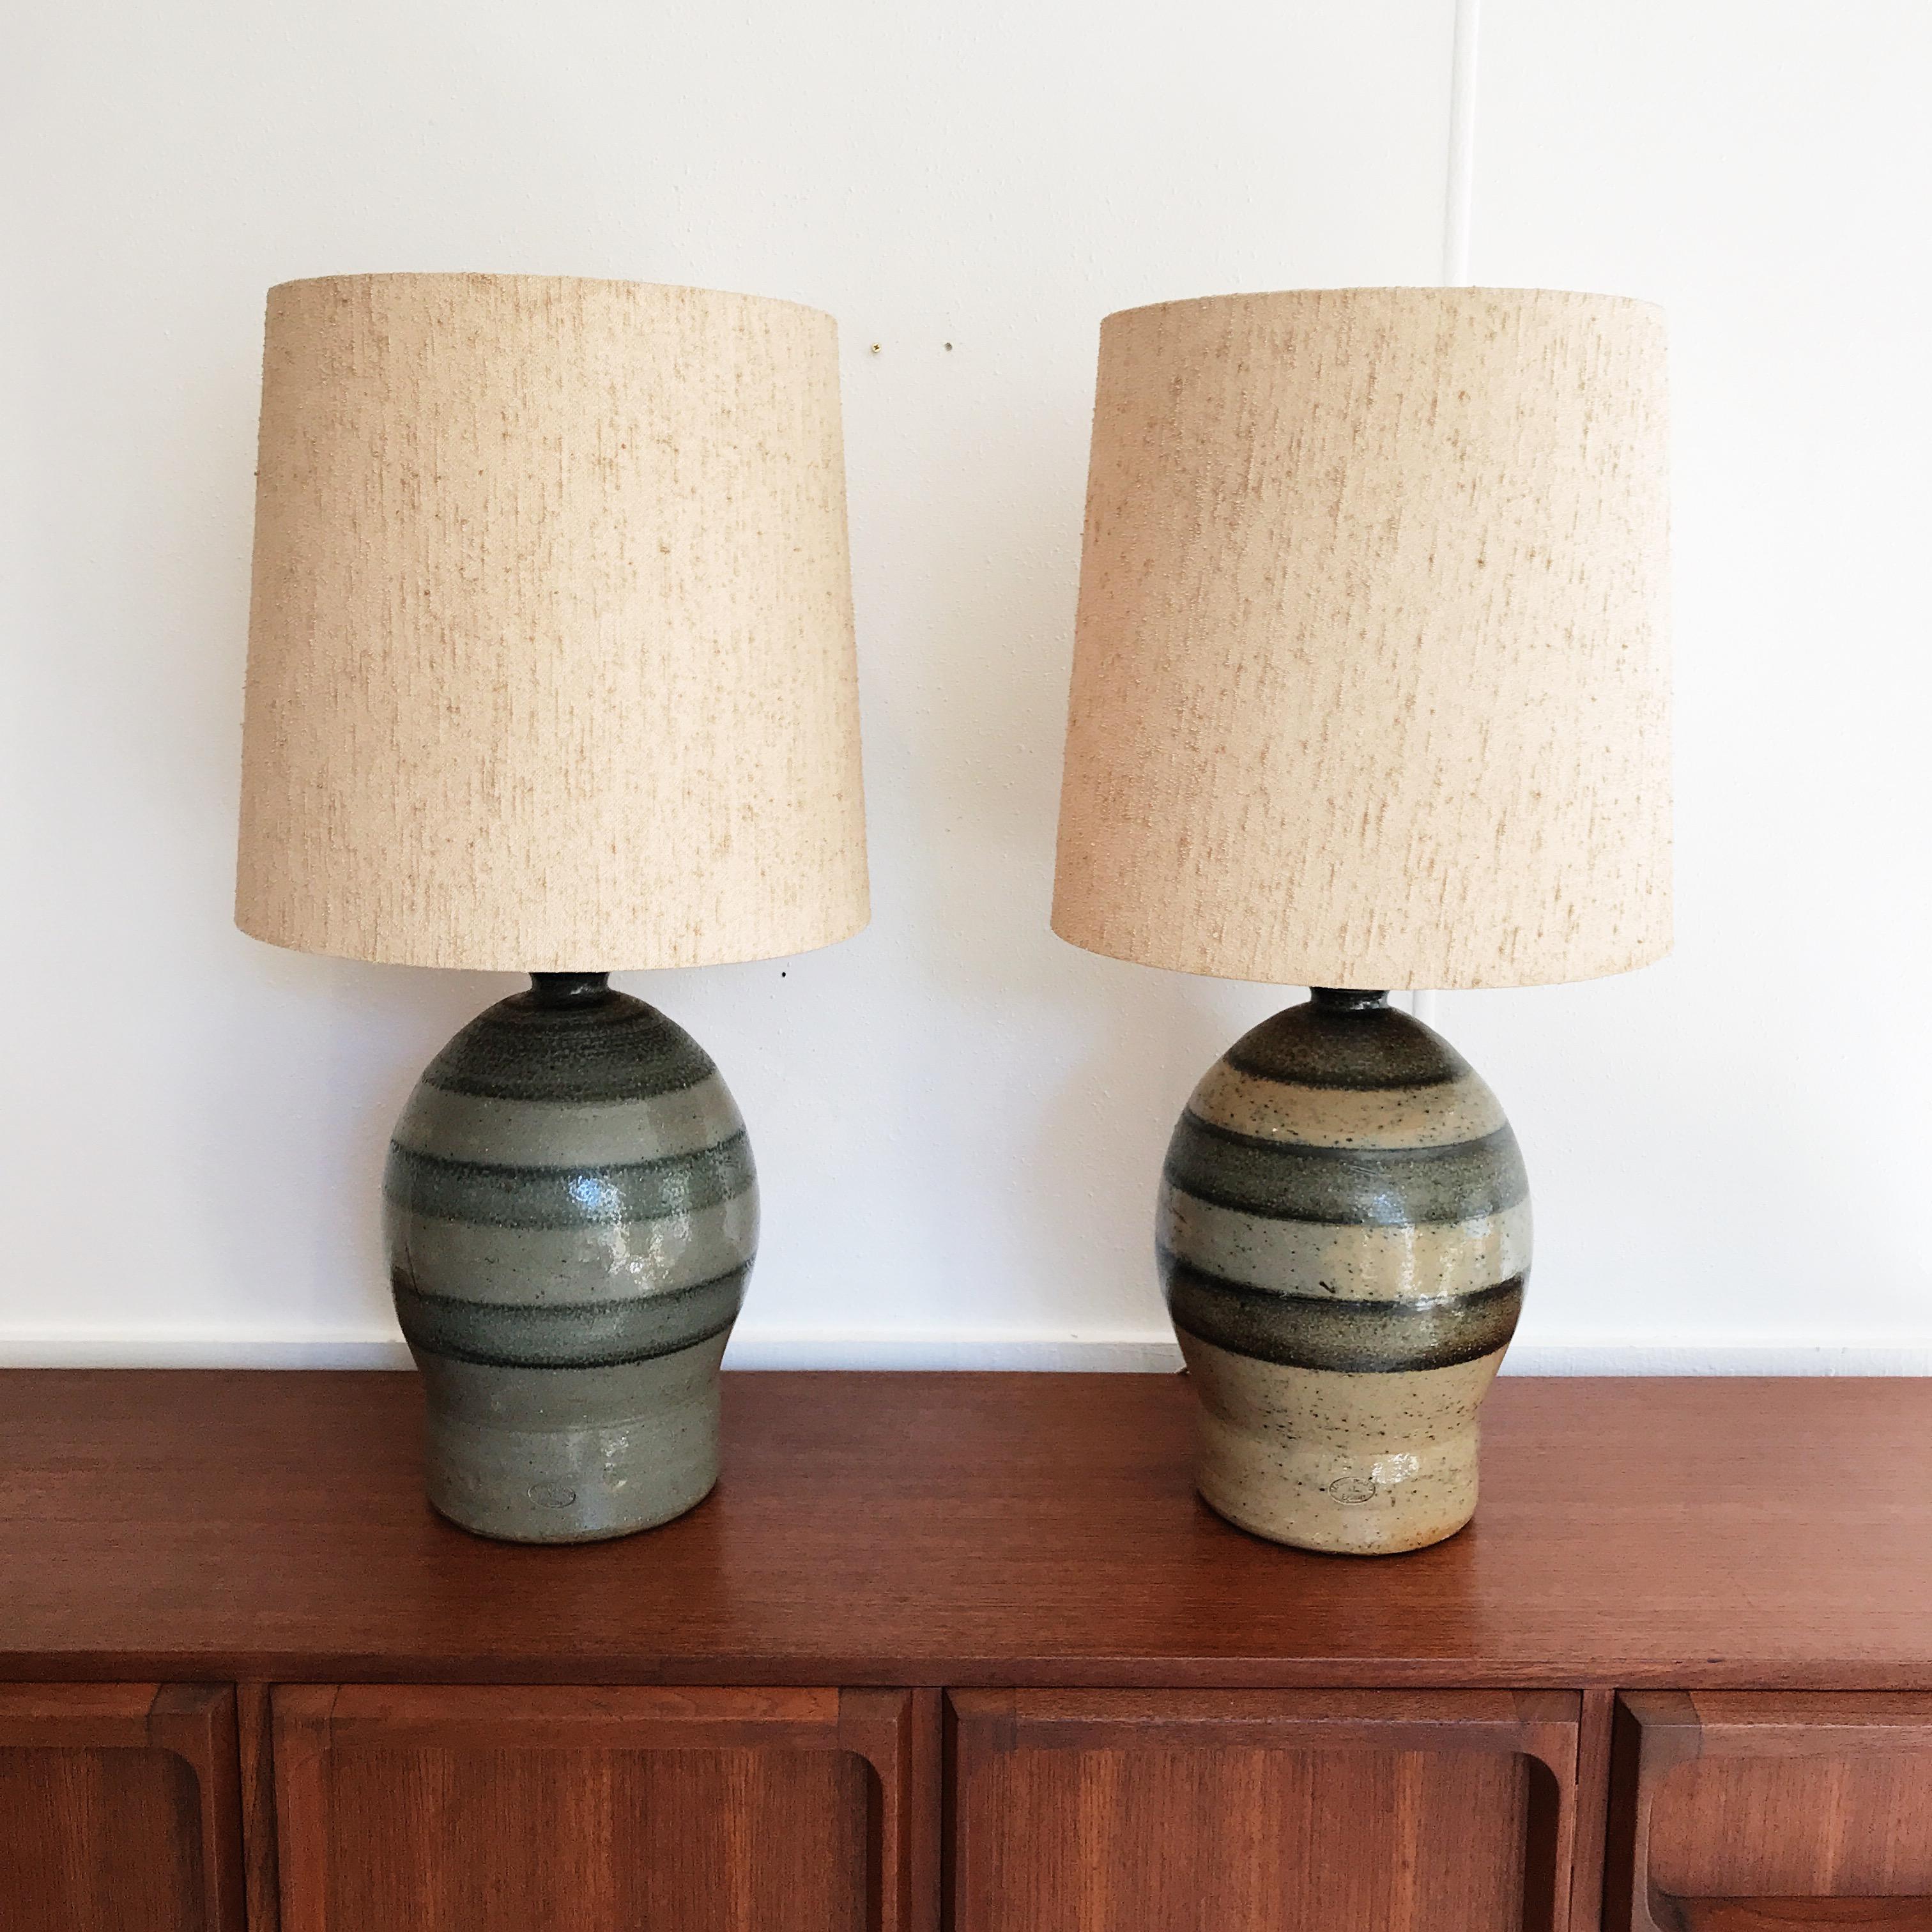 Extra large, odd couple pair of mid-20th century, water dispenser style table lamps, by renowned Australian potters, Bendigo Pottery, established 1958. 

Original and amazing, period correct, textured shades are included.

Without shade and